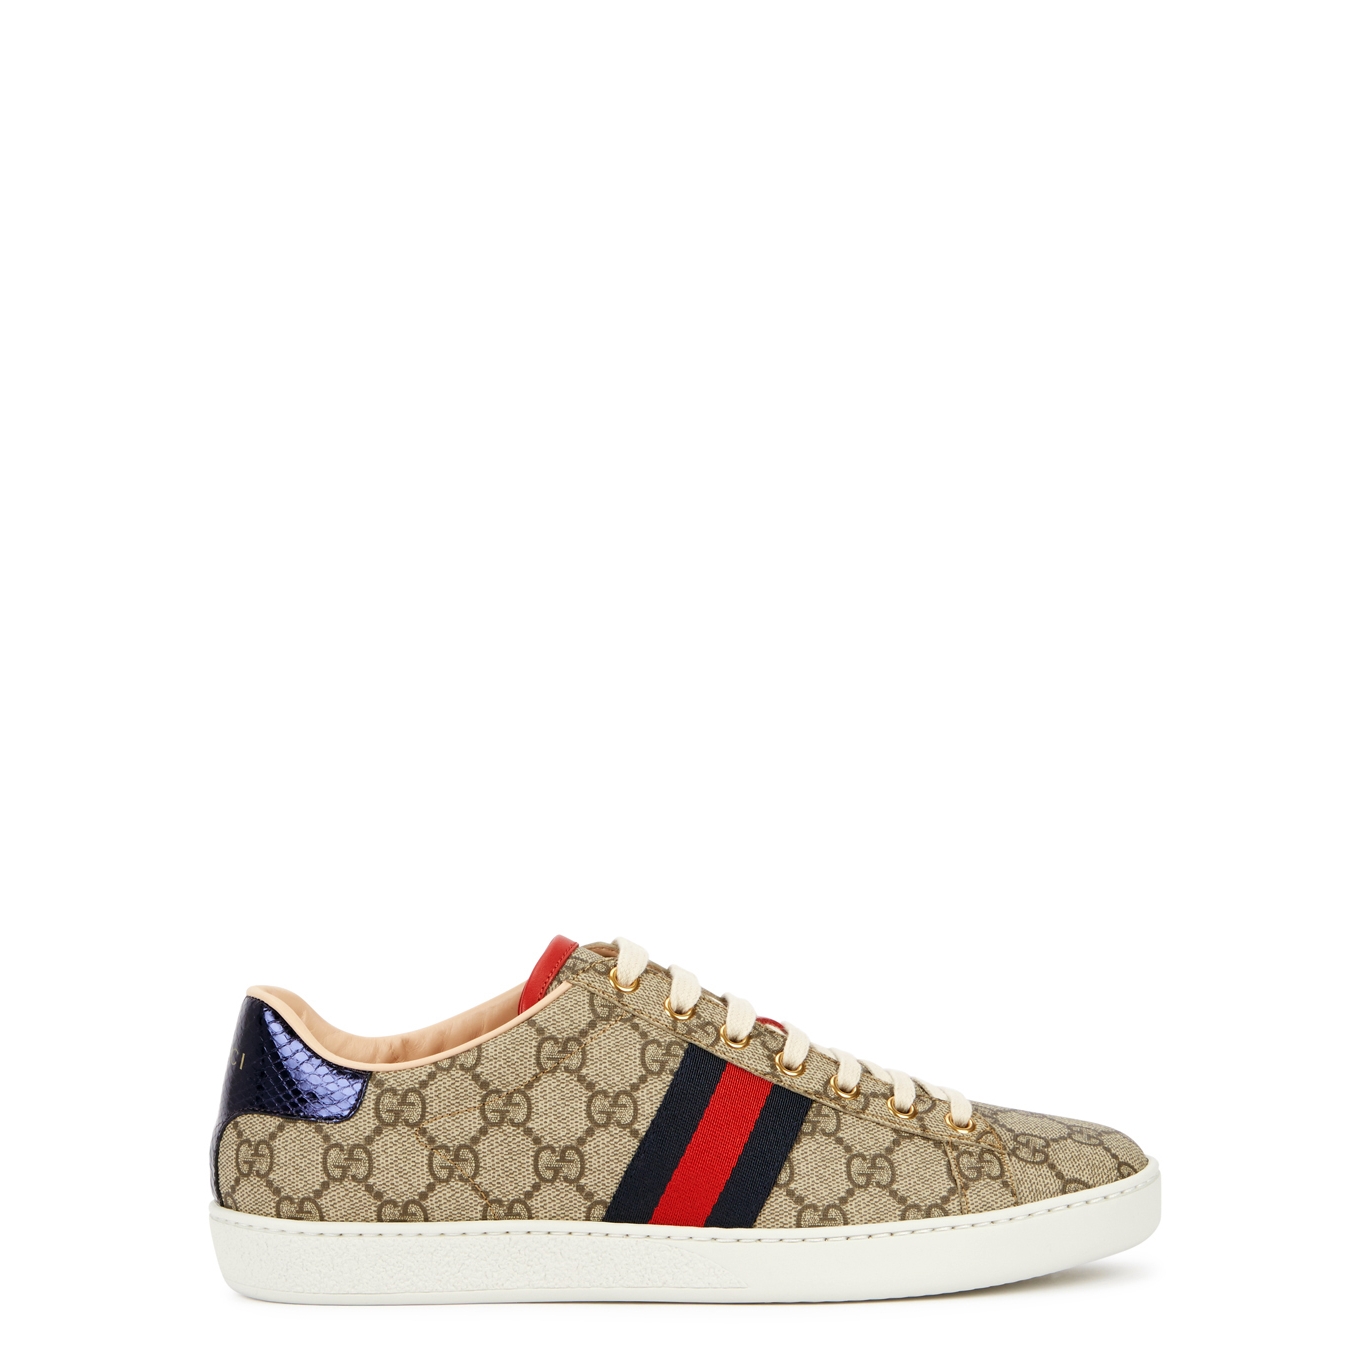 Gucci New Ace GG Supreme Taupe Sneakers - Beige - 6